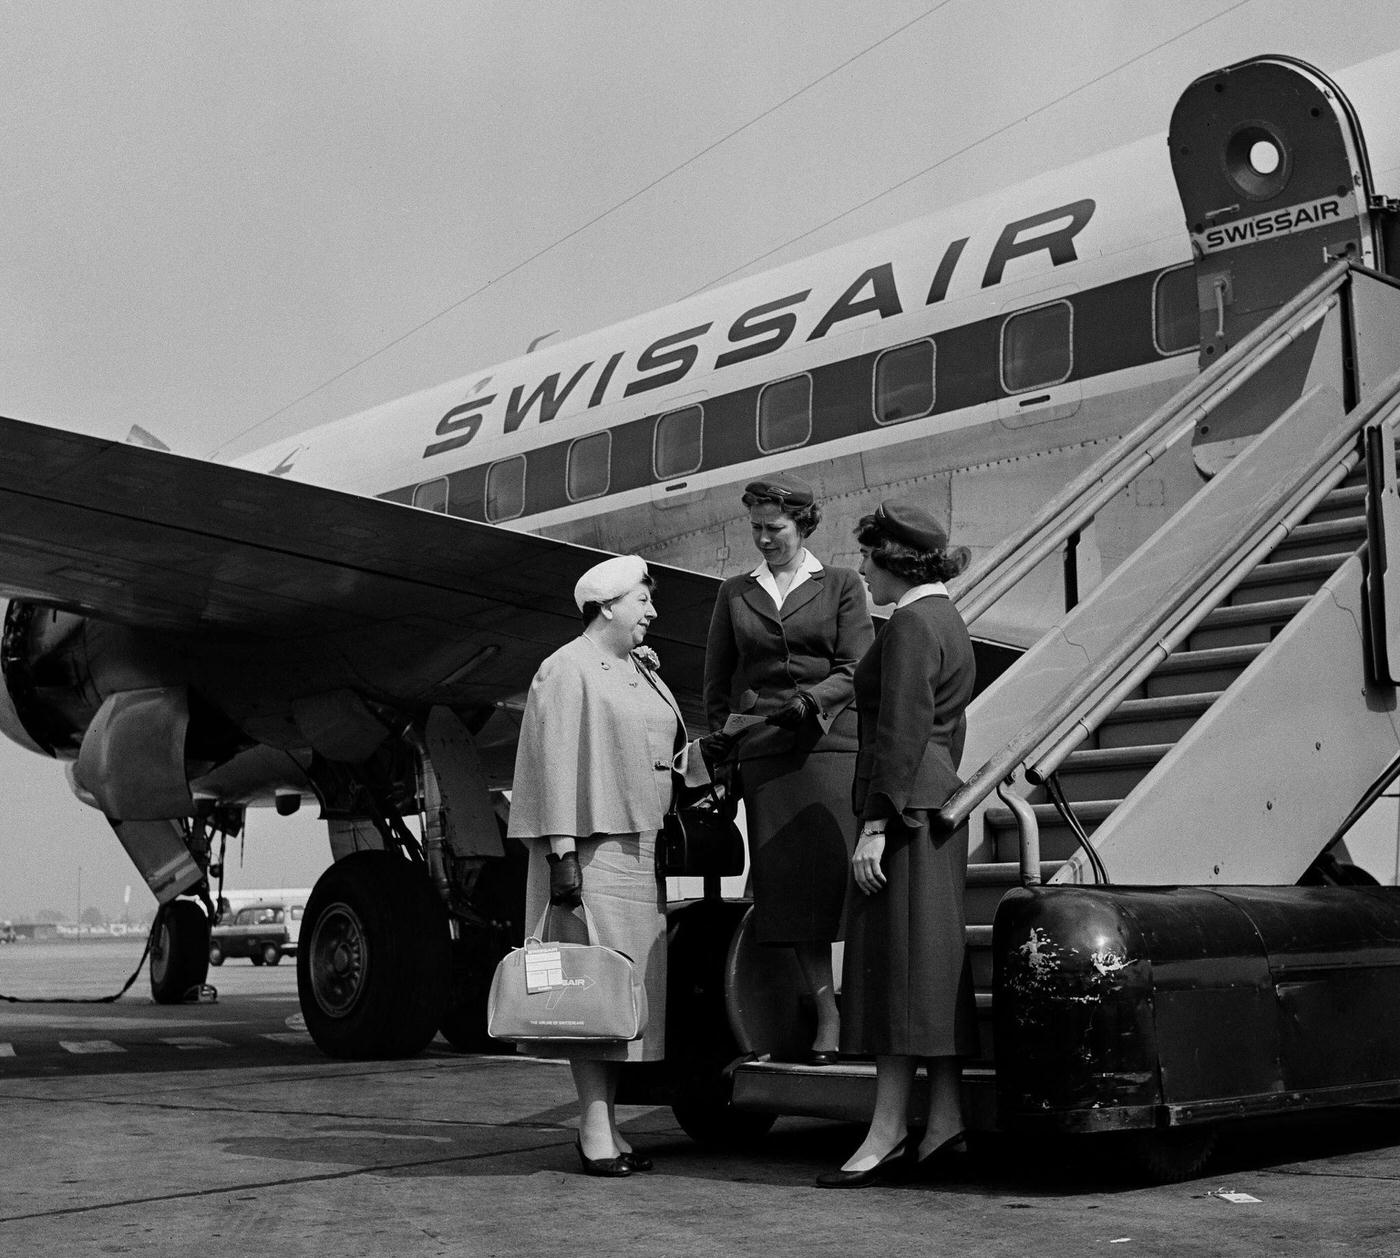 Two air hostesses welcome a passenger boarding a Swiss Air aircraft at London Airport in the 1950s.